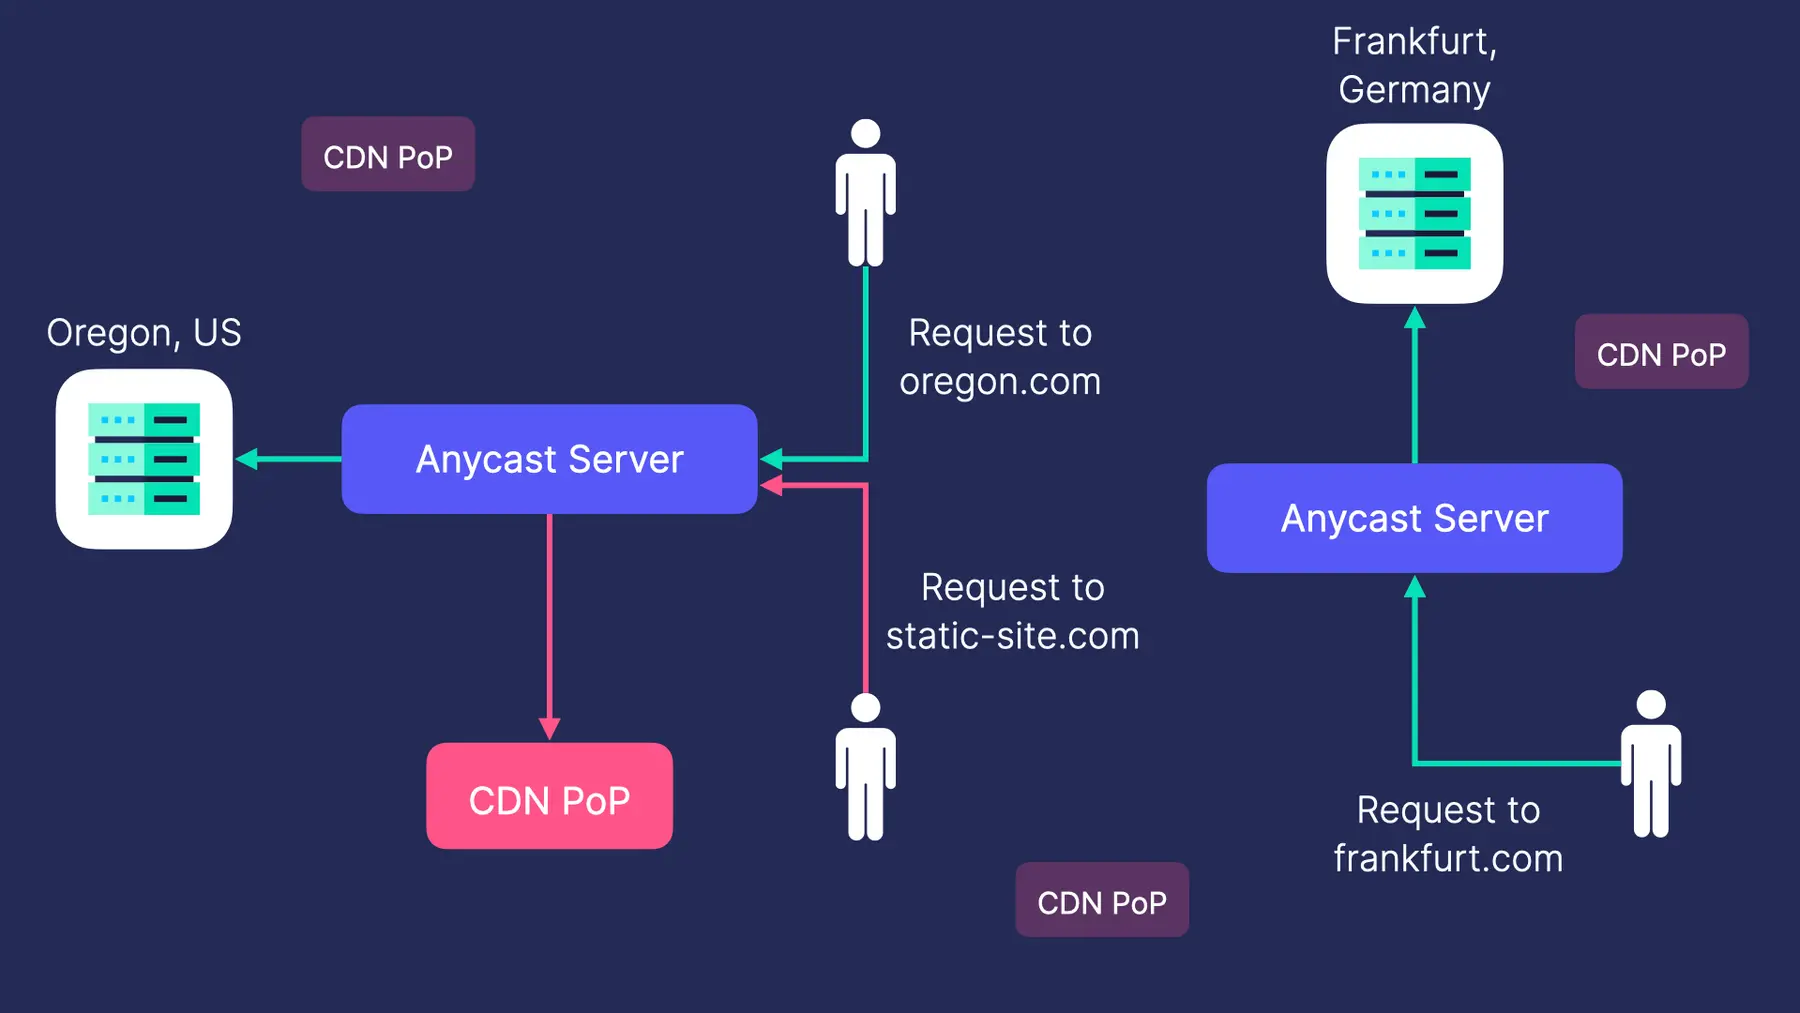 How Render uses anycast to route traffic to the proper origin